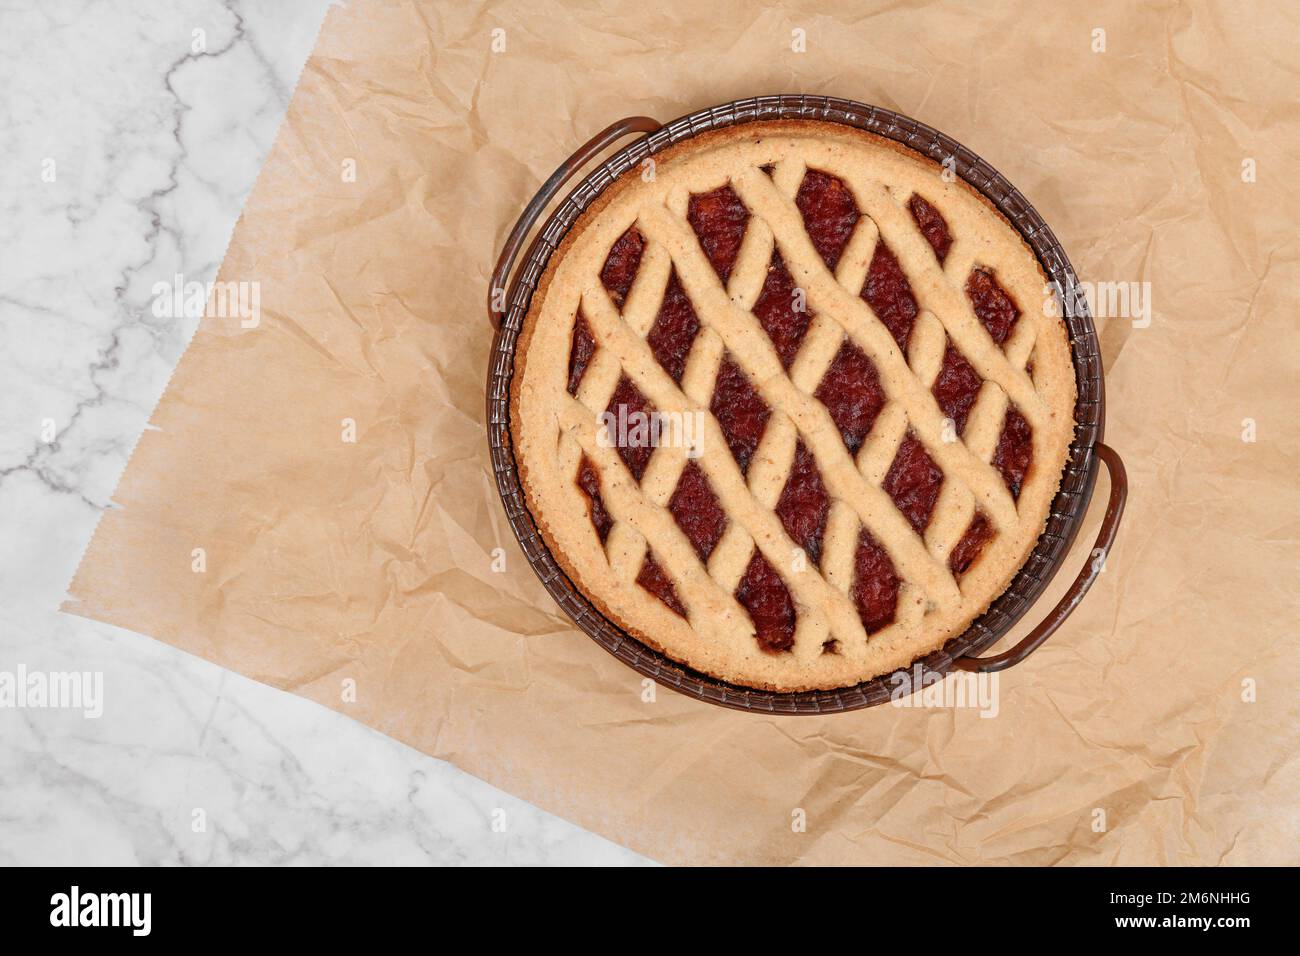 Pie called 'Linzer Torte', a traditional Austrian shortcake pastry topped with fruit preserves and nuts with lattice design Stock Photo